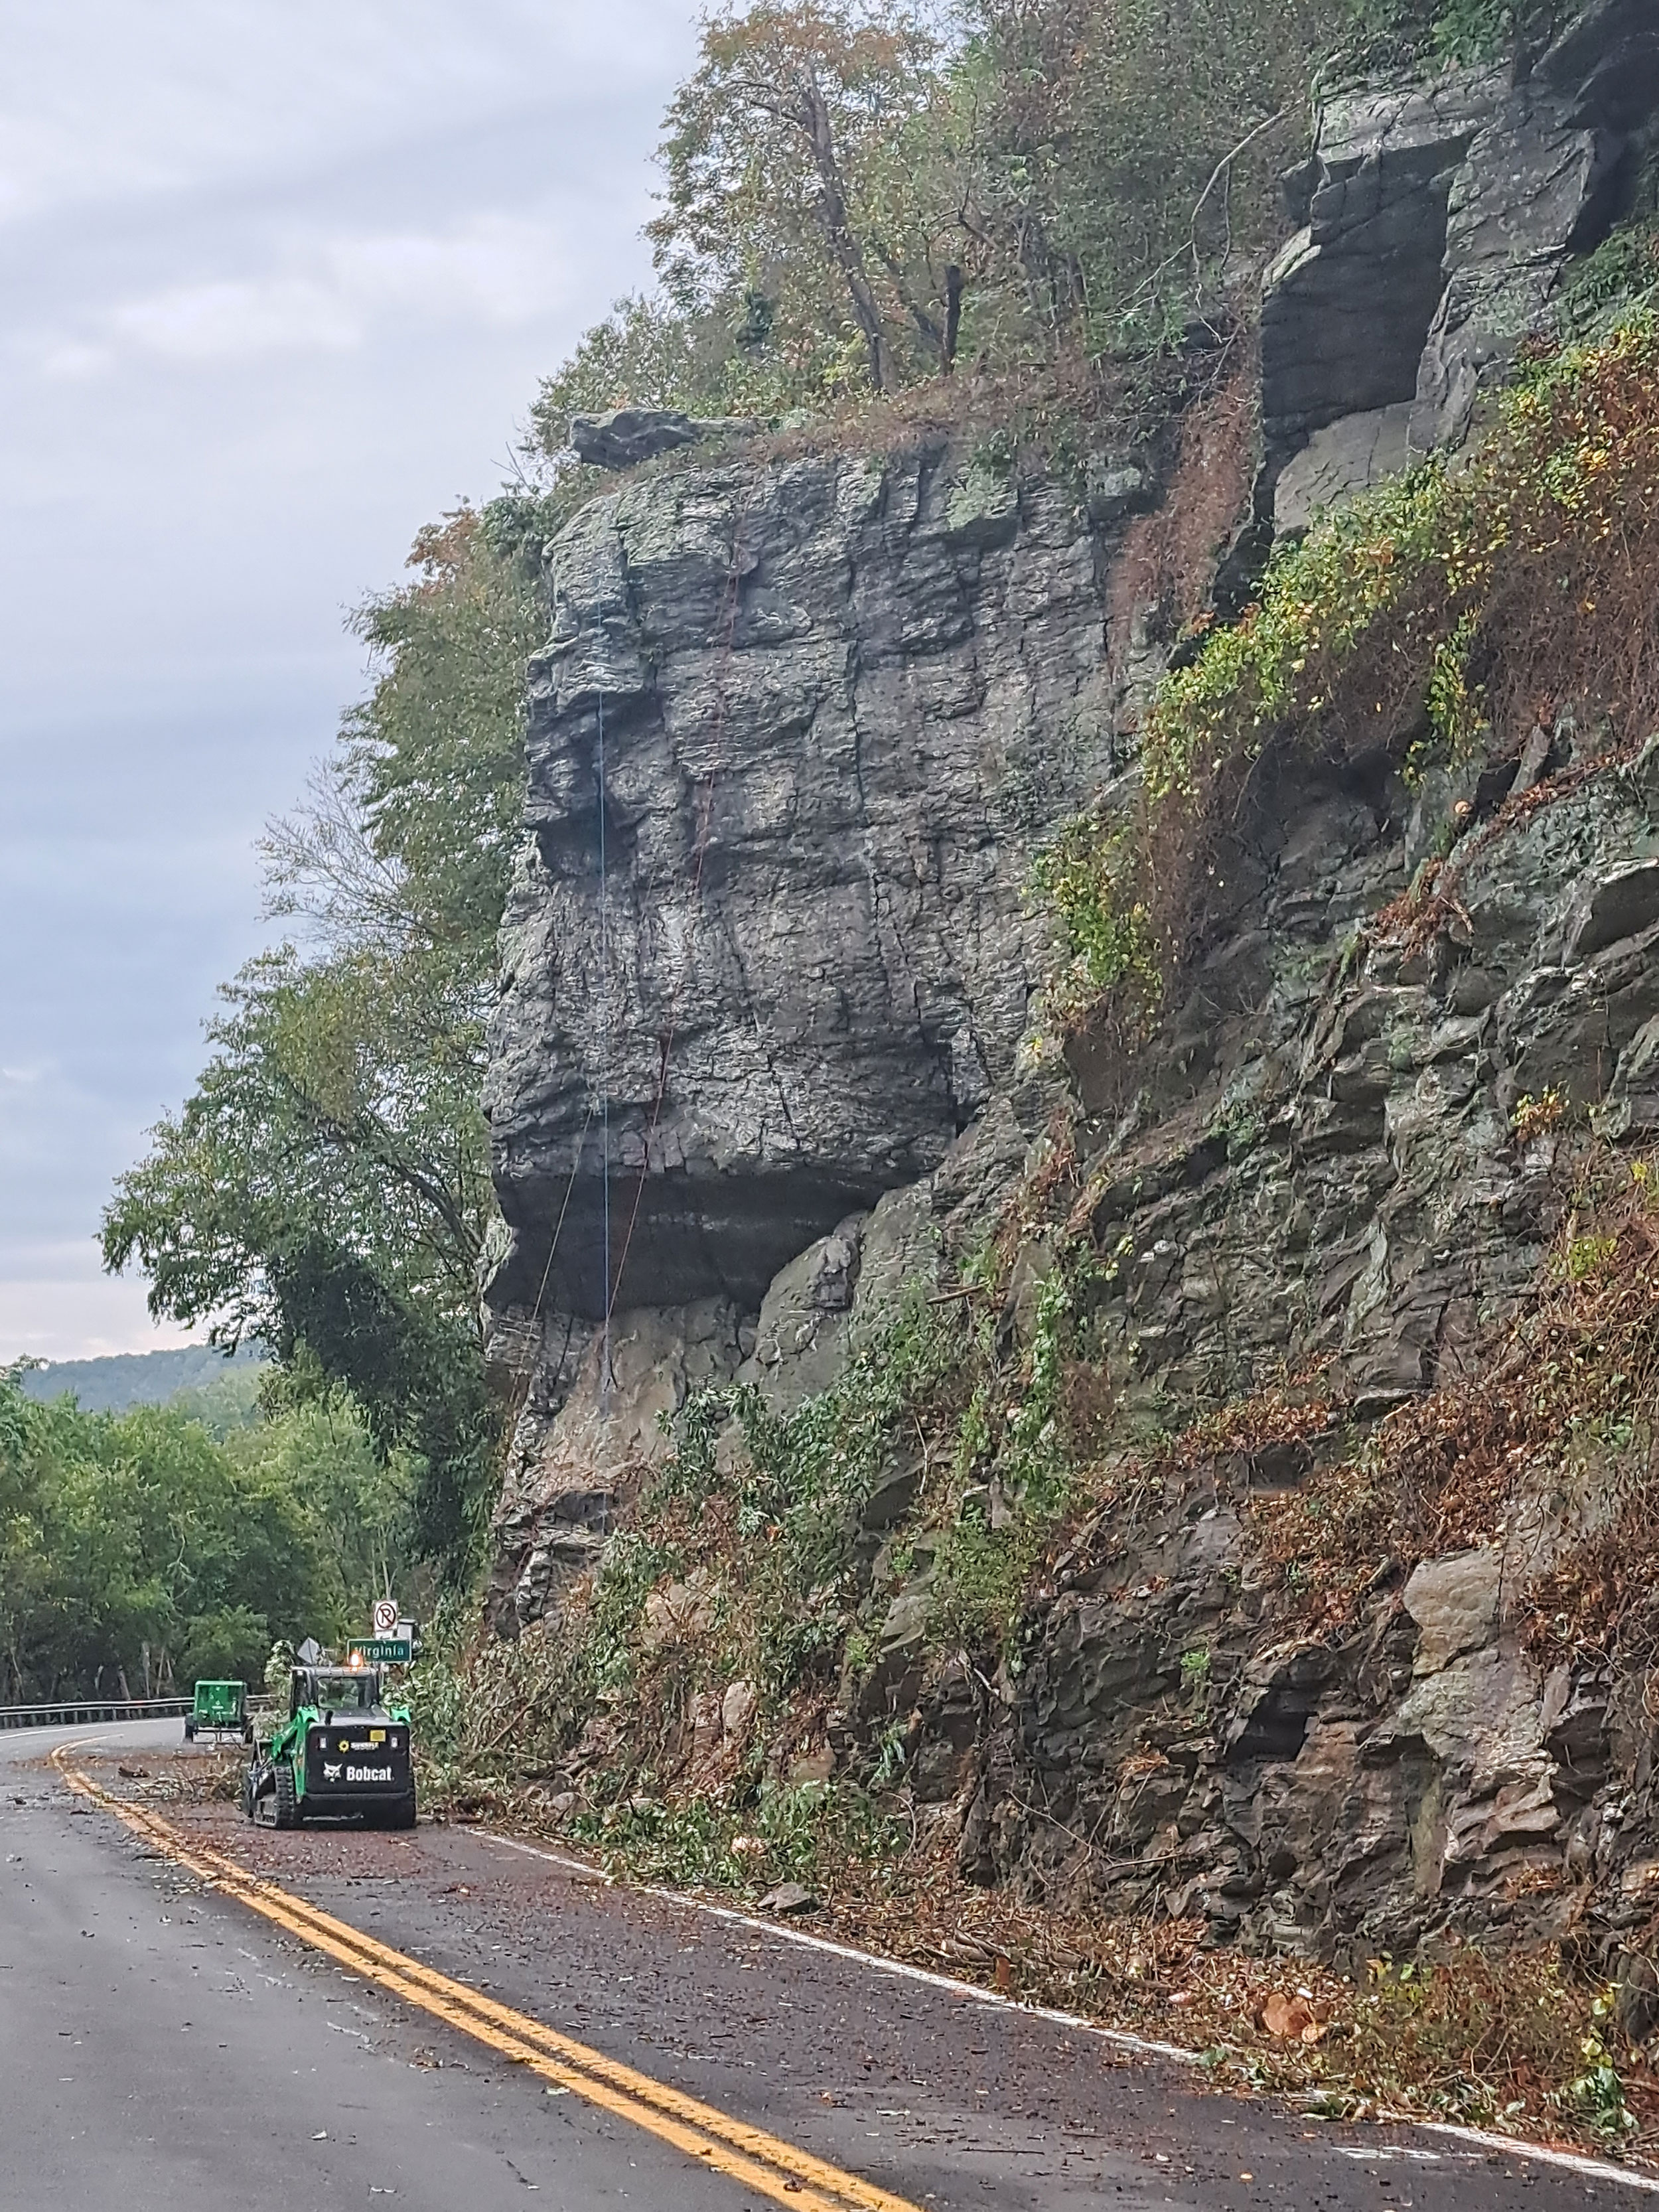 Photo shows the clearing of trees and brush in the vicinity of a large overhanging rock near the WV/VA State Line.  Access ropes are installed to allow for scaling of the rock face.